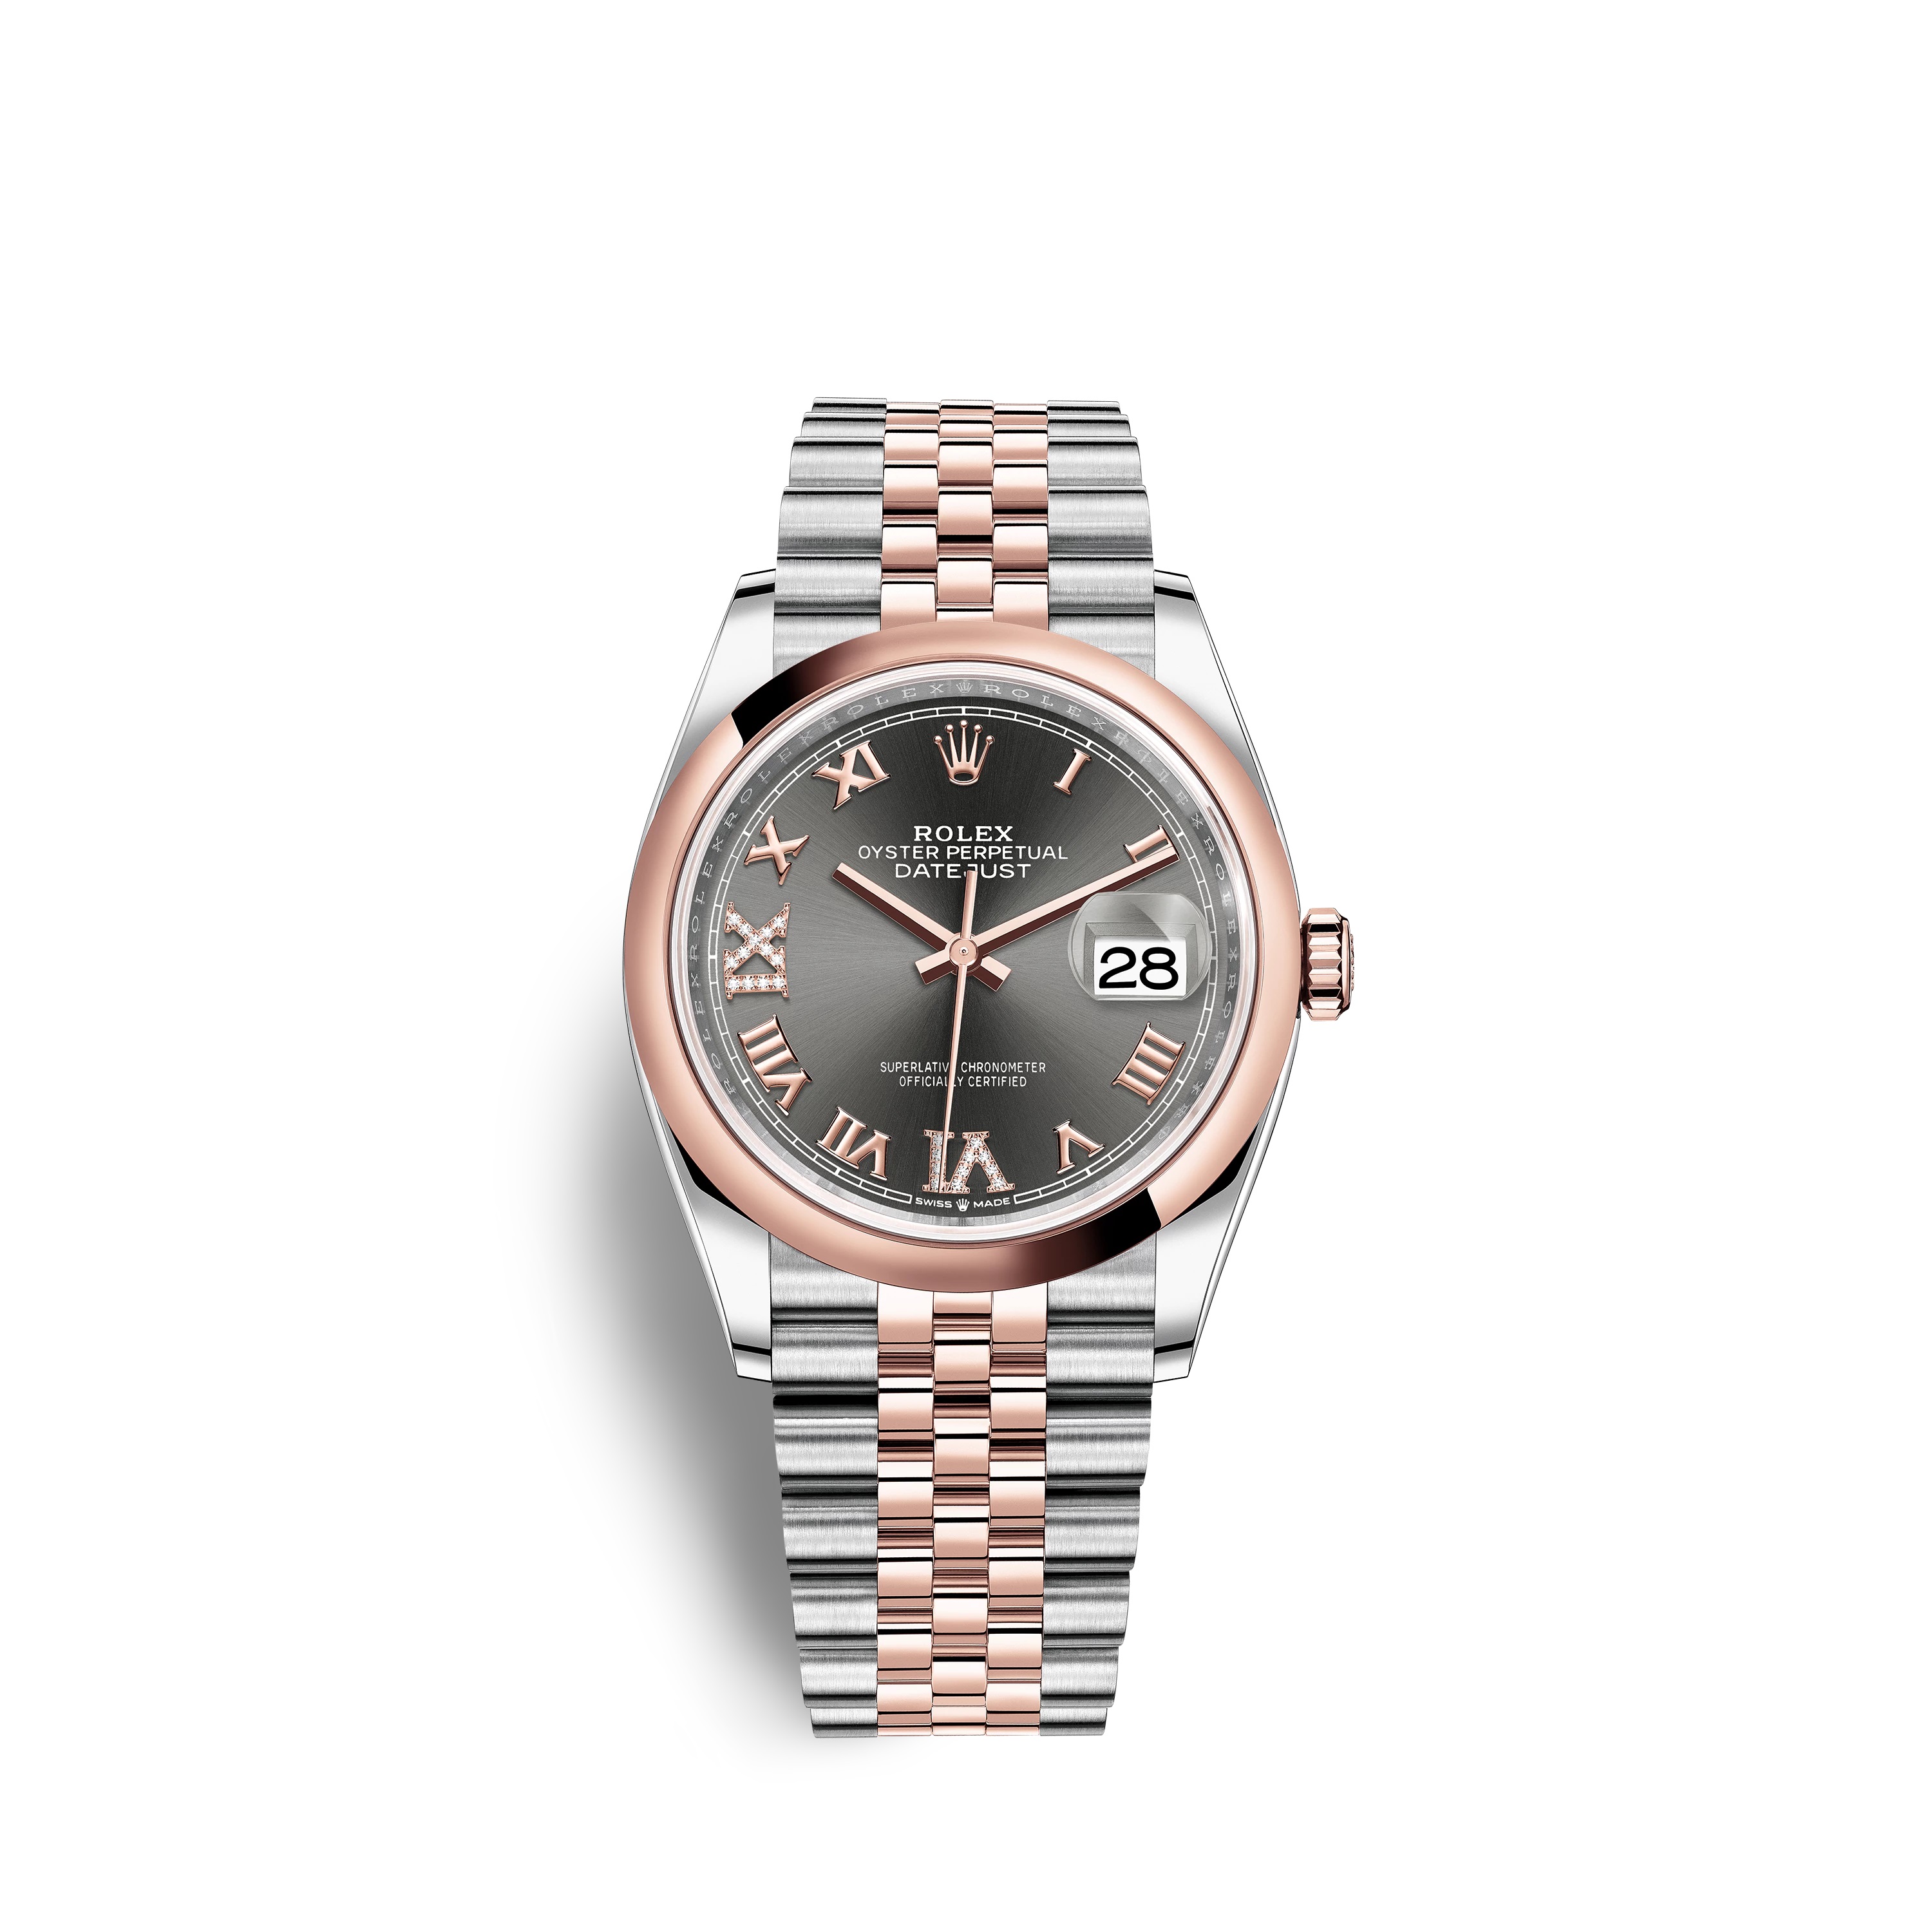 Datejust 36 126201 Rose Gold & Stainless Steel Watch (Dark Rhodium Set with Diamonds) - Click Image to Close